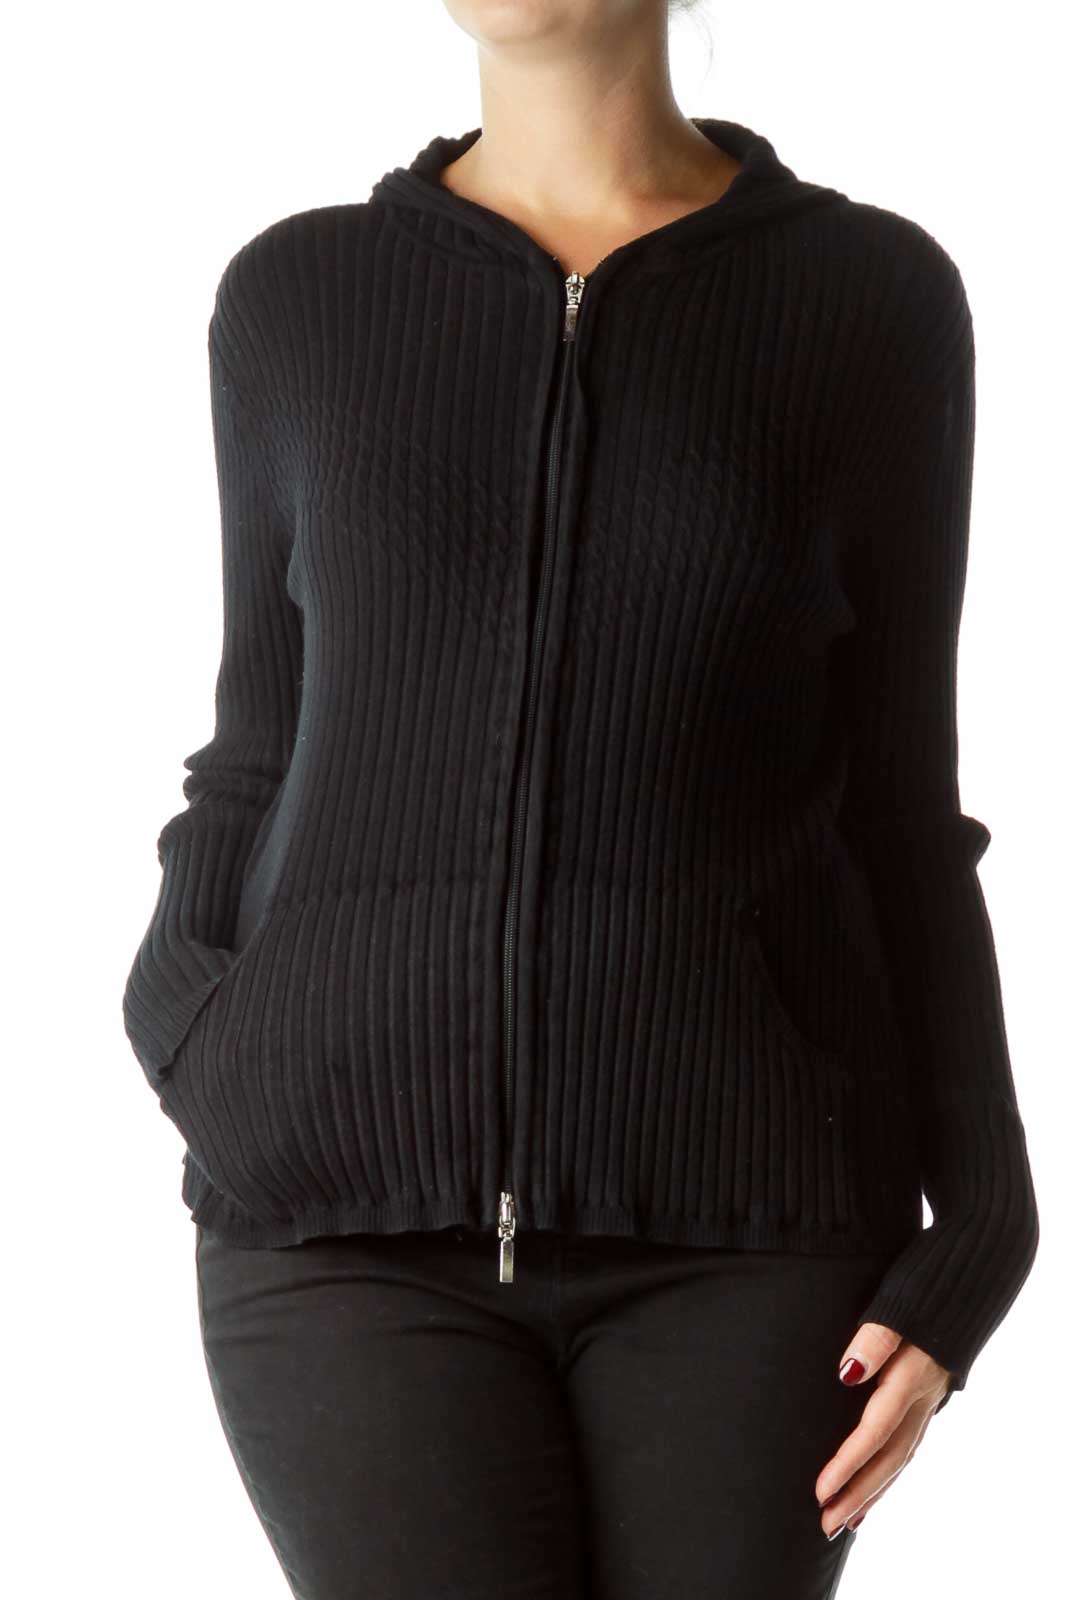 Black Hooded Zippered Cardigan Front